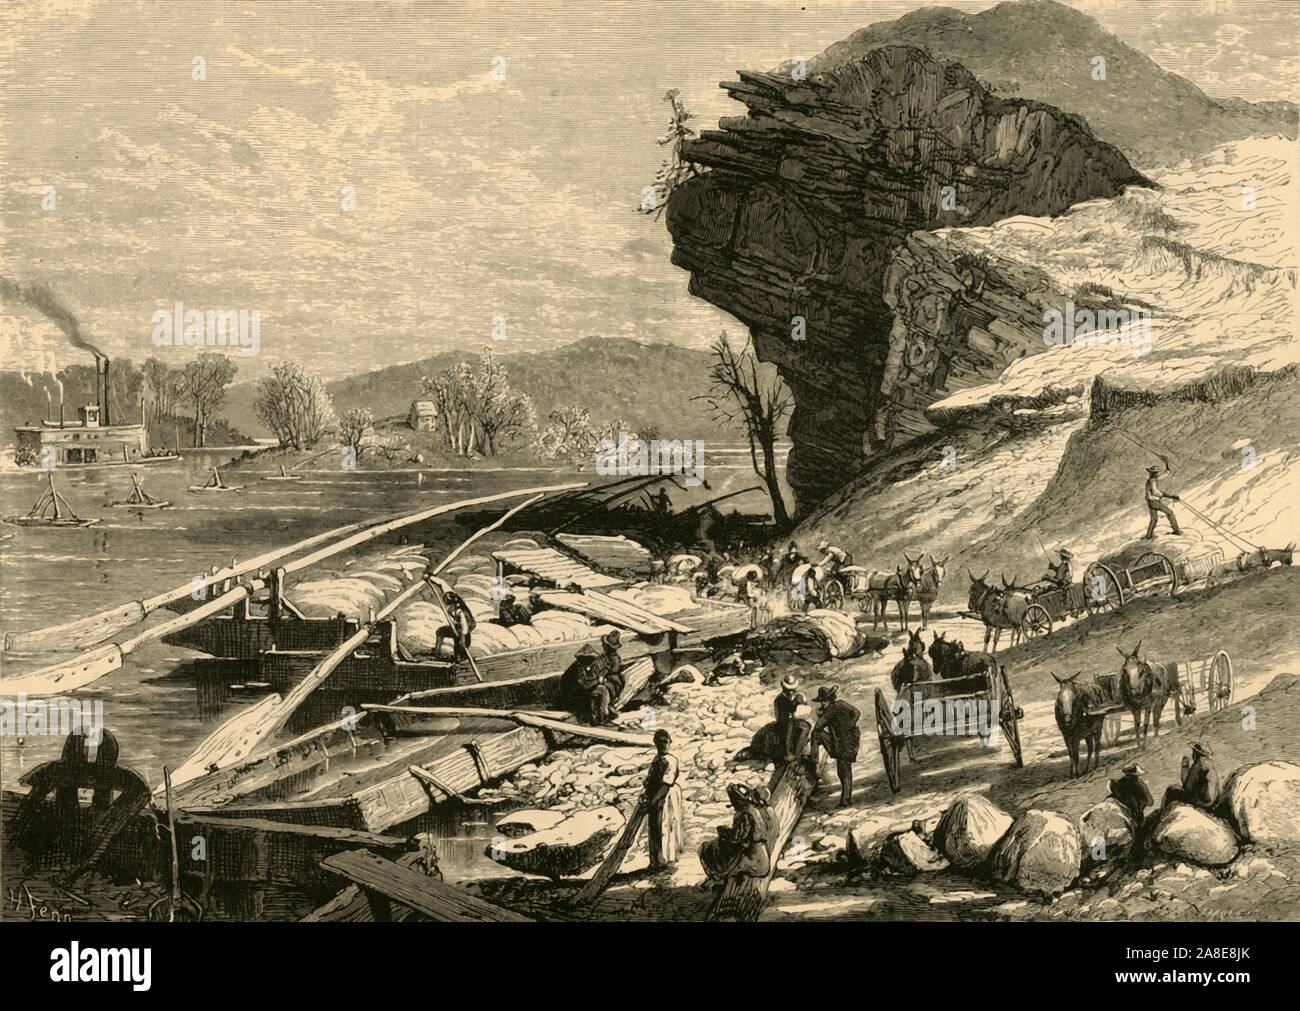 'The Tennessee at Chattanooga', 1872. Cargo boats on the Tennessee River, Chattanooga, Tennessee, USA. From &quot;Picturesque America; or, The Land We Live In, A Delineation by Pen and Pencil of the Mountains, Rivers, Lakes...with Illustrations on Steel and Wood by Eminent American Artists&quot; Vol. I, edited by William Cullen Bryant. [D. Appleton and Company, New York, 1872] Stock Photo